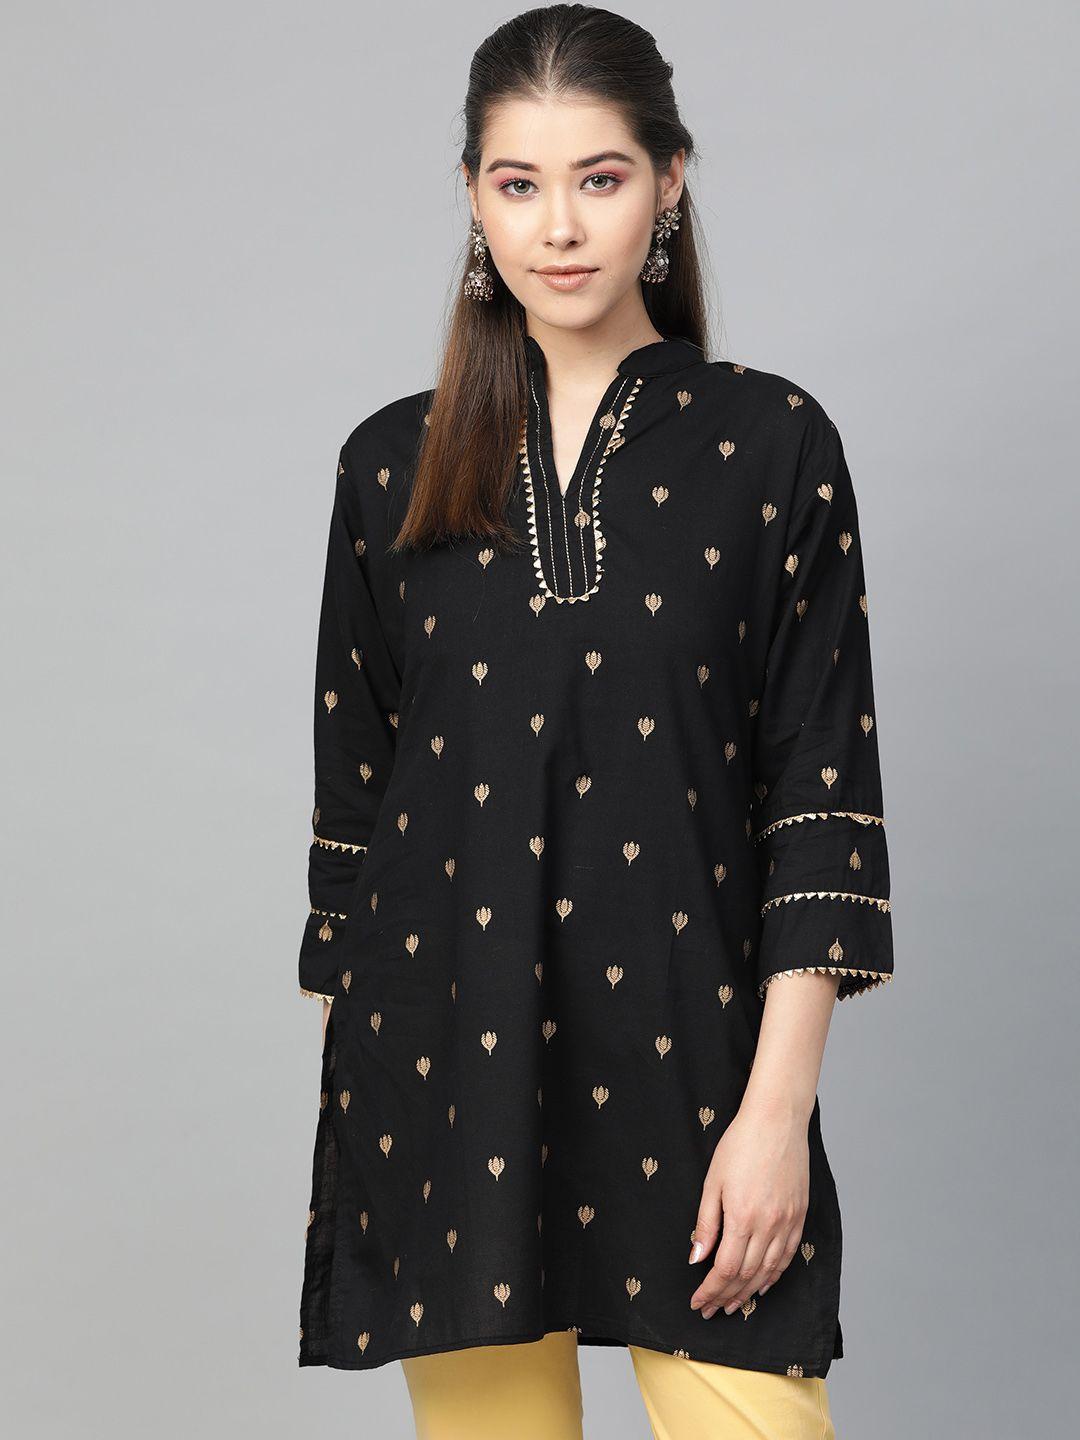 bhama couture women black & golden printed tunic